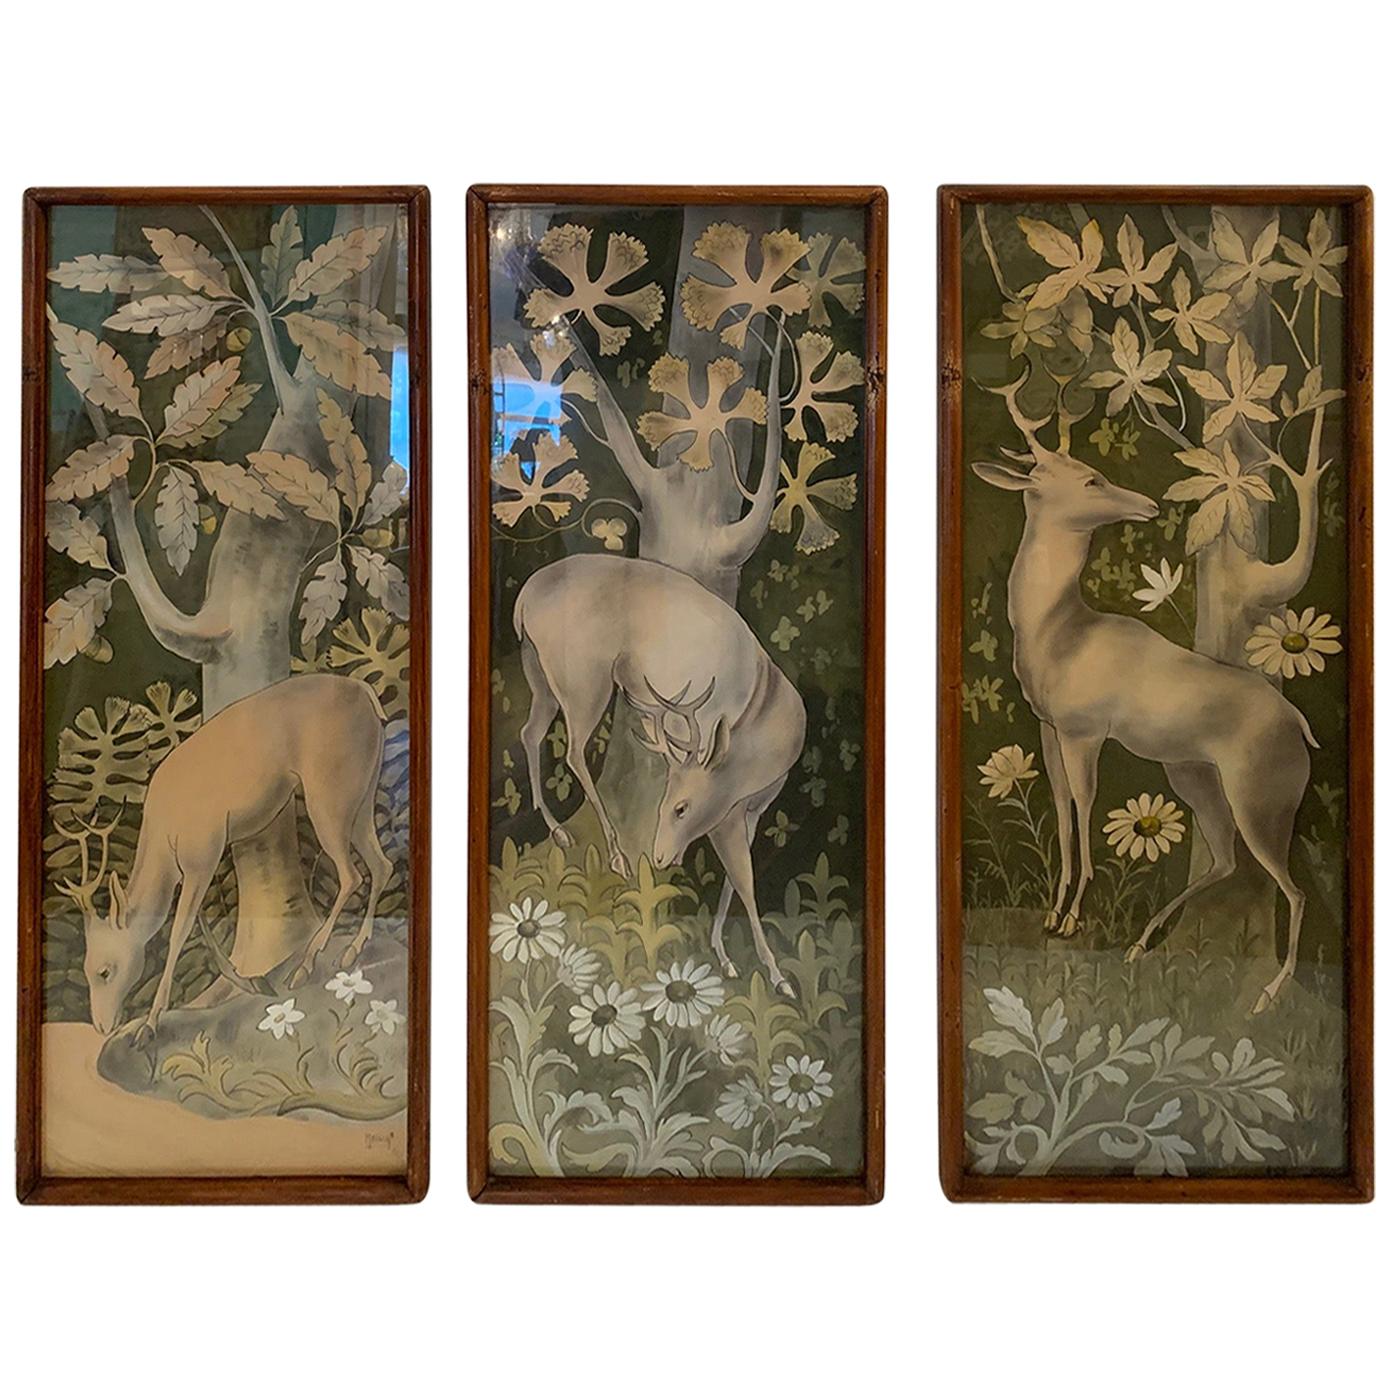 Mystical Vintage Gouache Triptych of Deer in the Forest